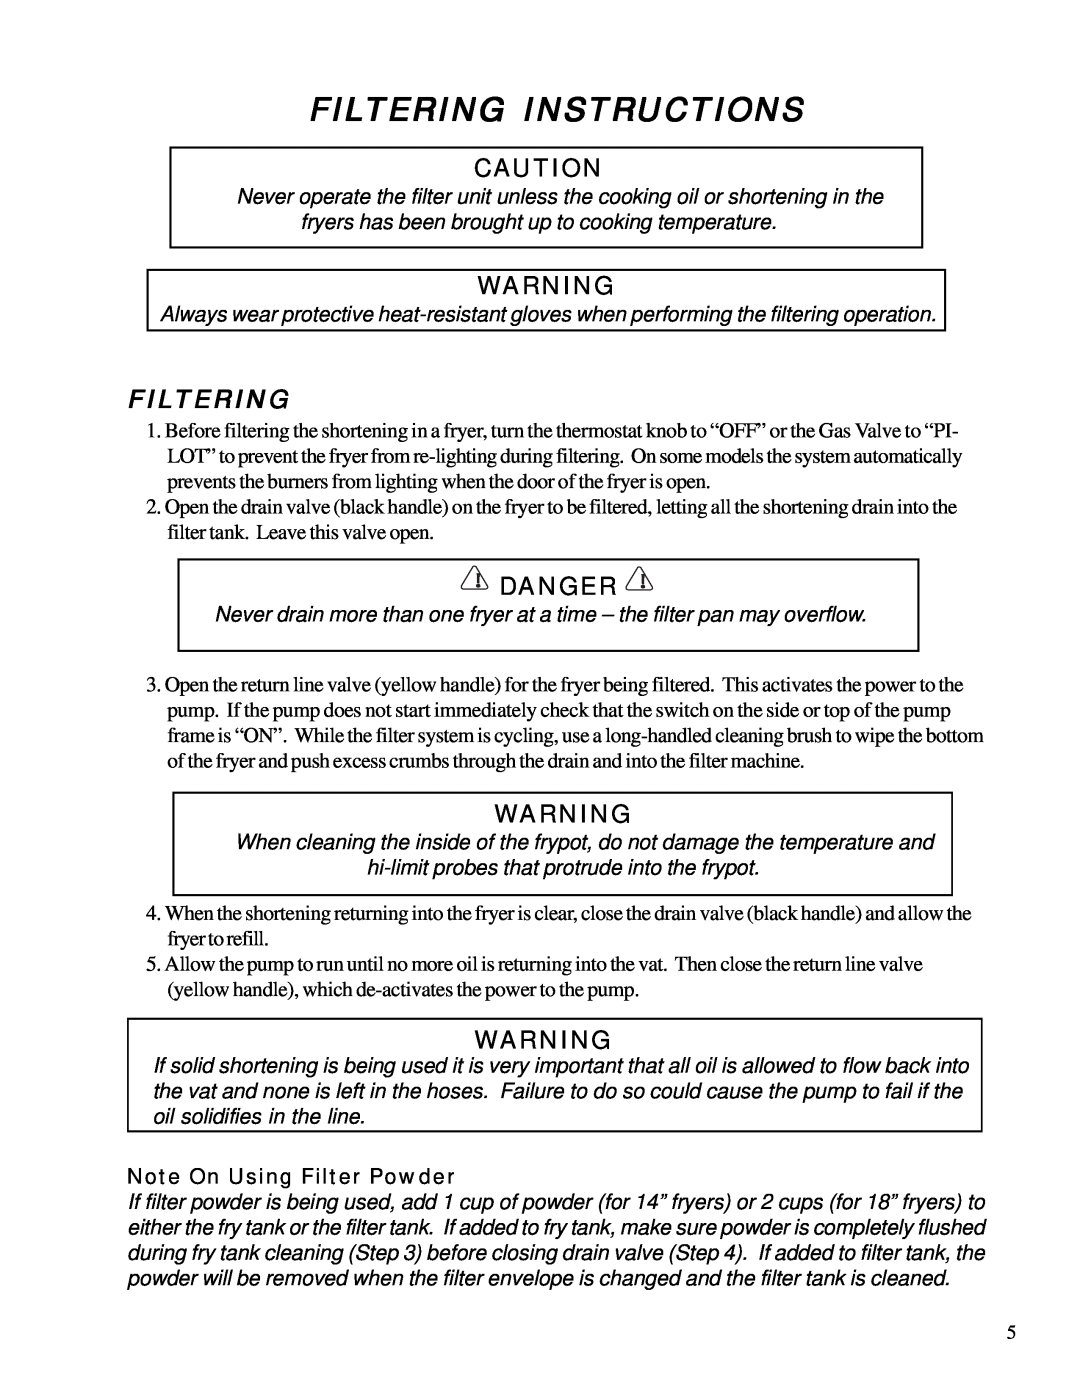 Anetsberger Brothers FM-14 warranty Filtering Instructions, Note On Using Filter Powder, Danger 